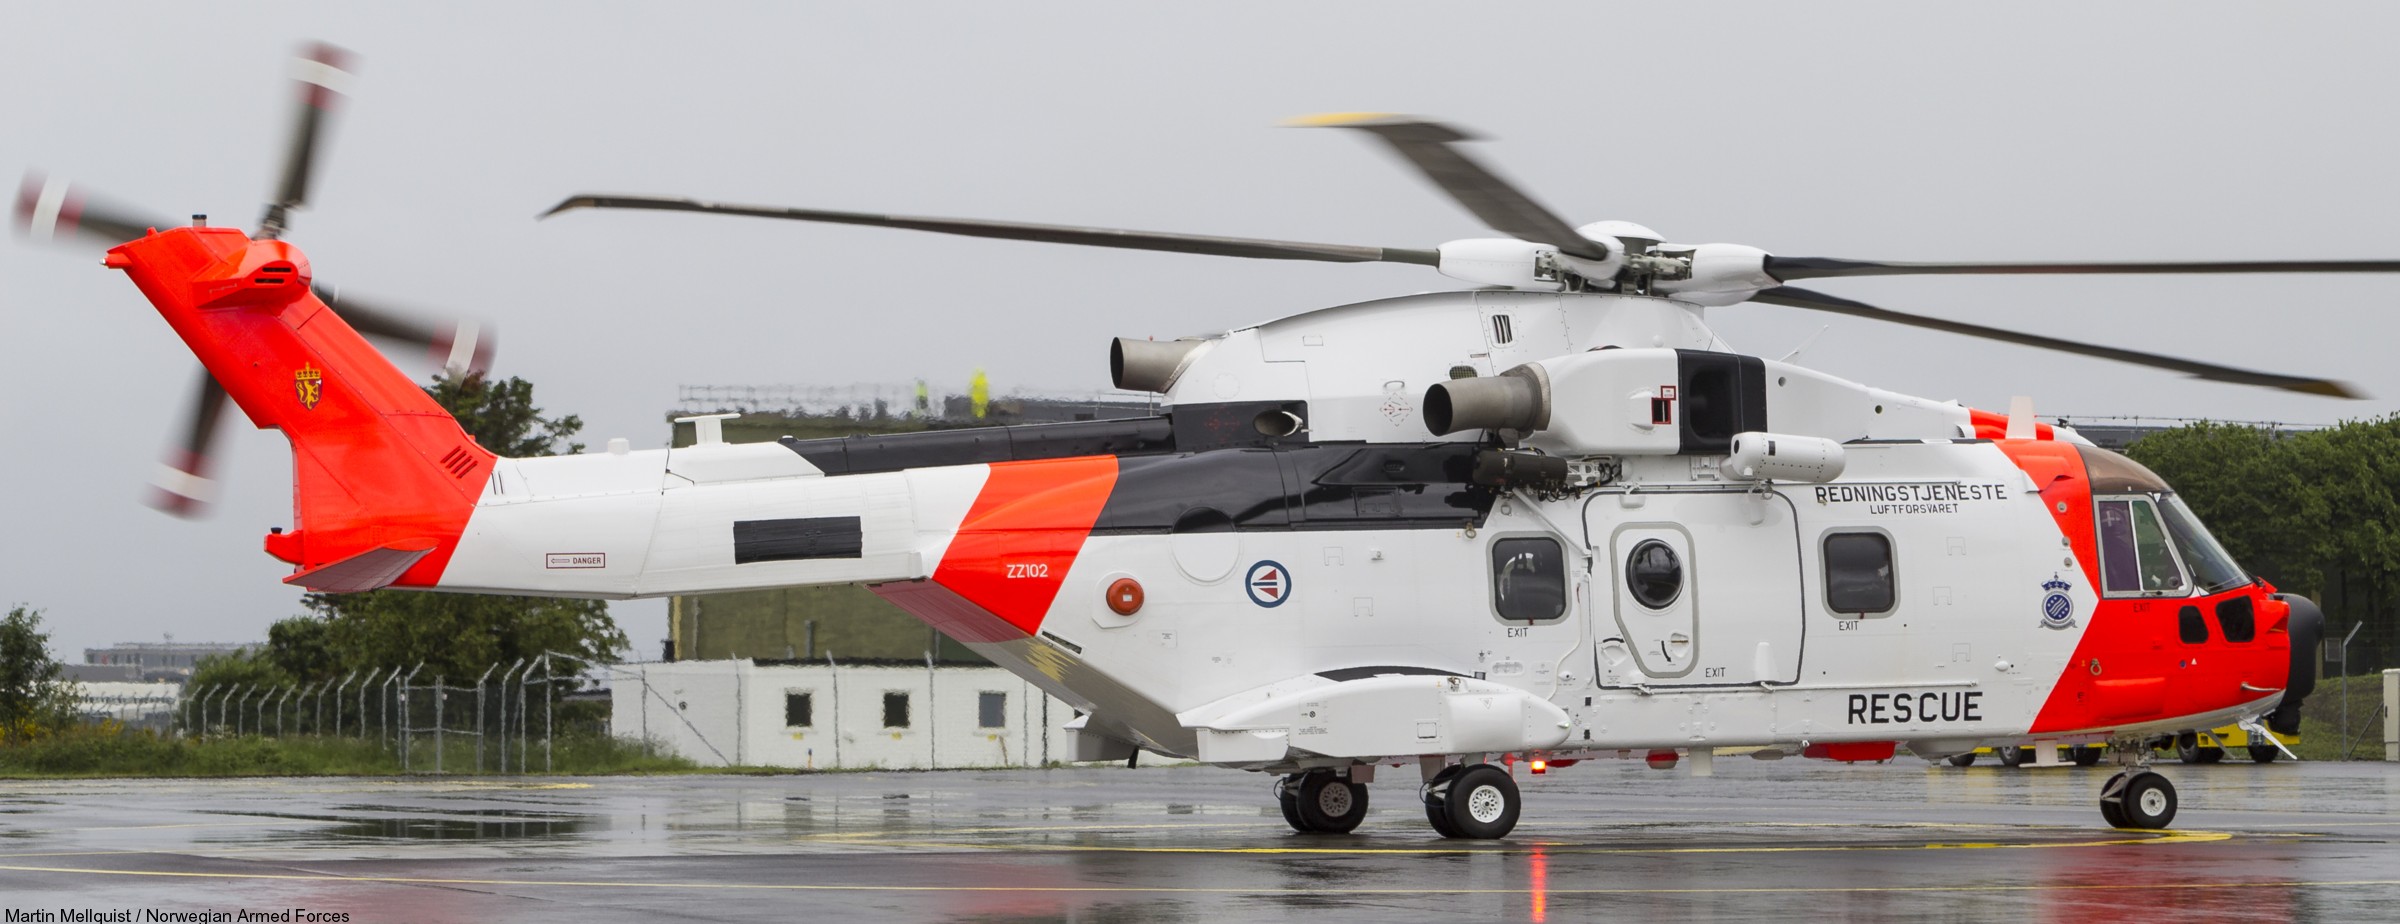 agusta westland aw101 rescue helicopter royal norwegian air force luftforsvaret sar queen sola air station 02